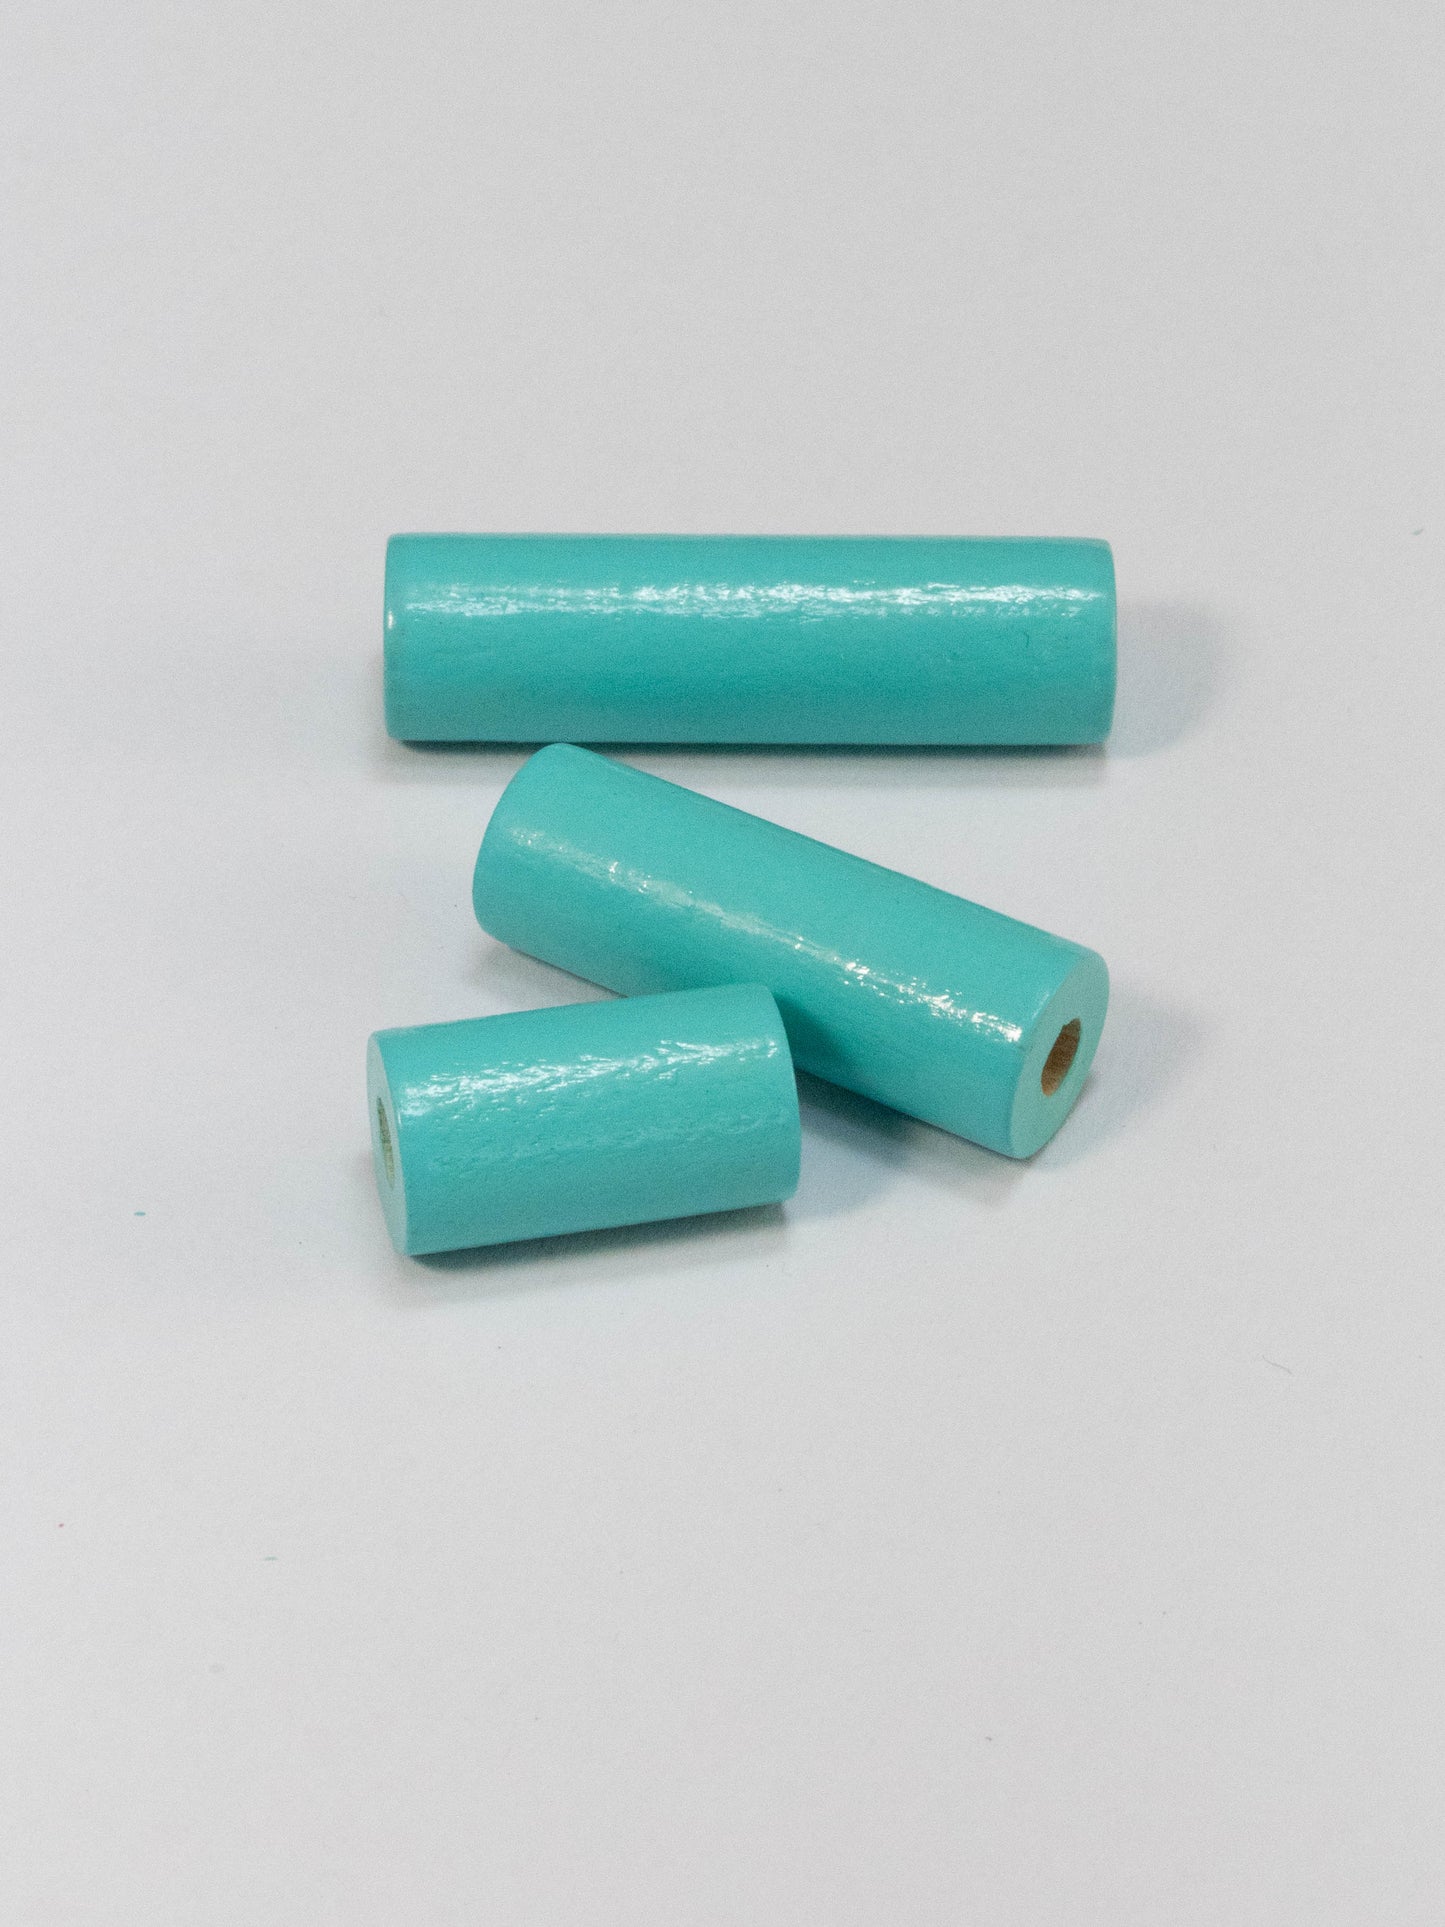 Turquoise Cylinder Wooden Bead